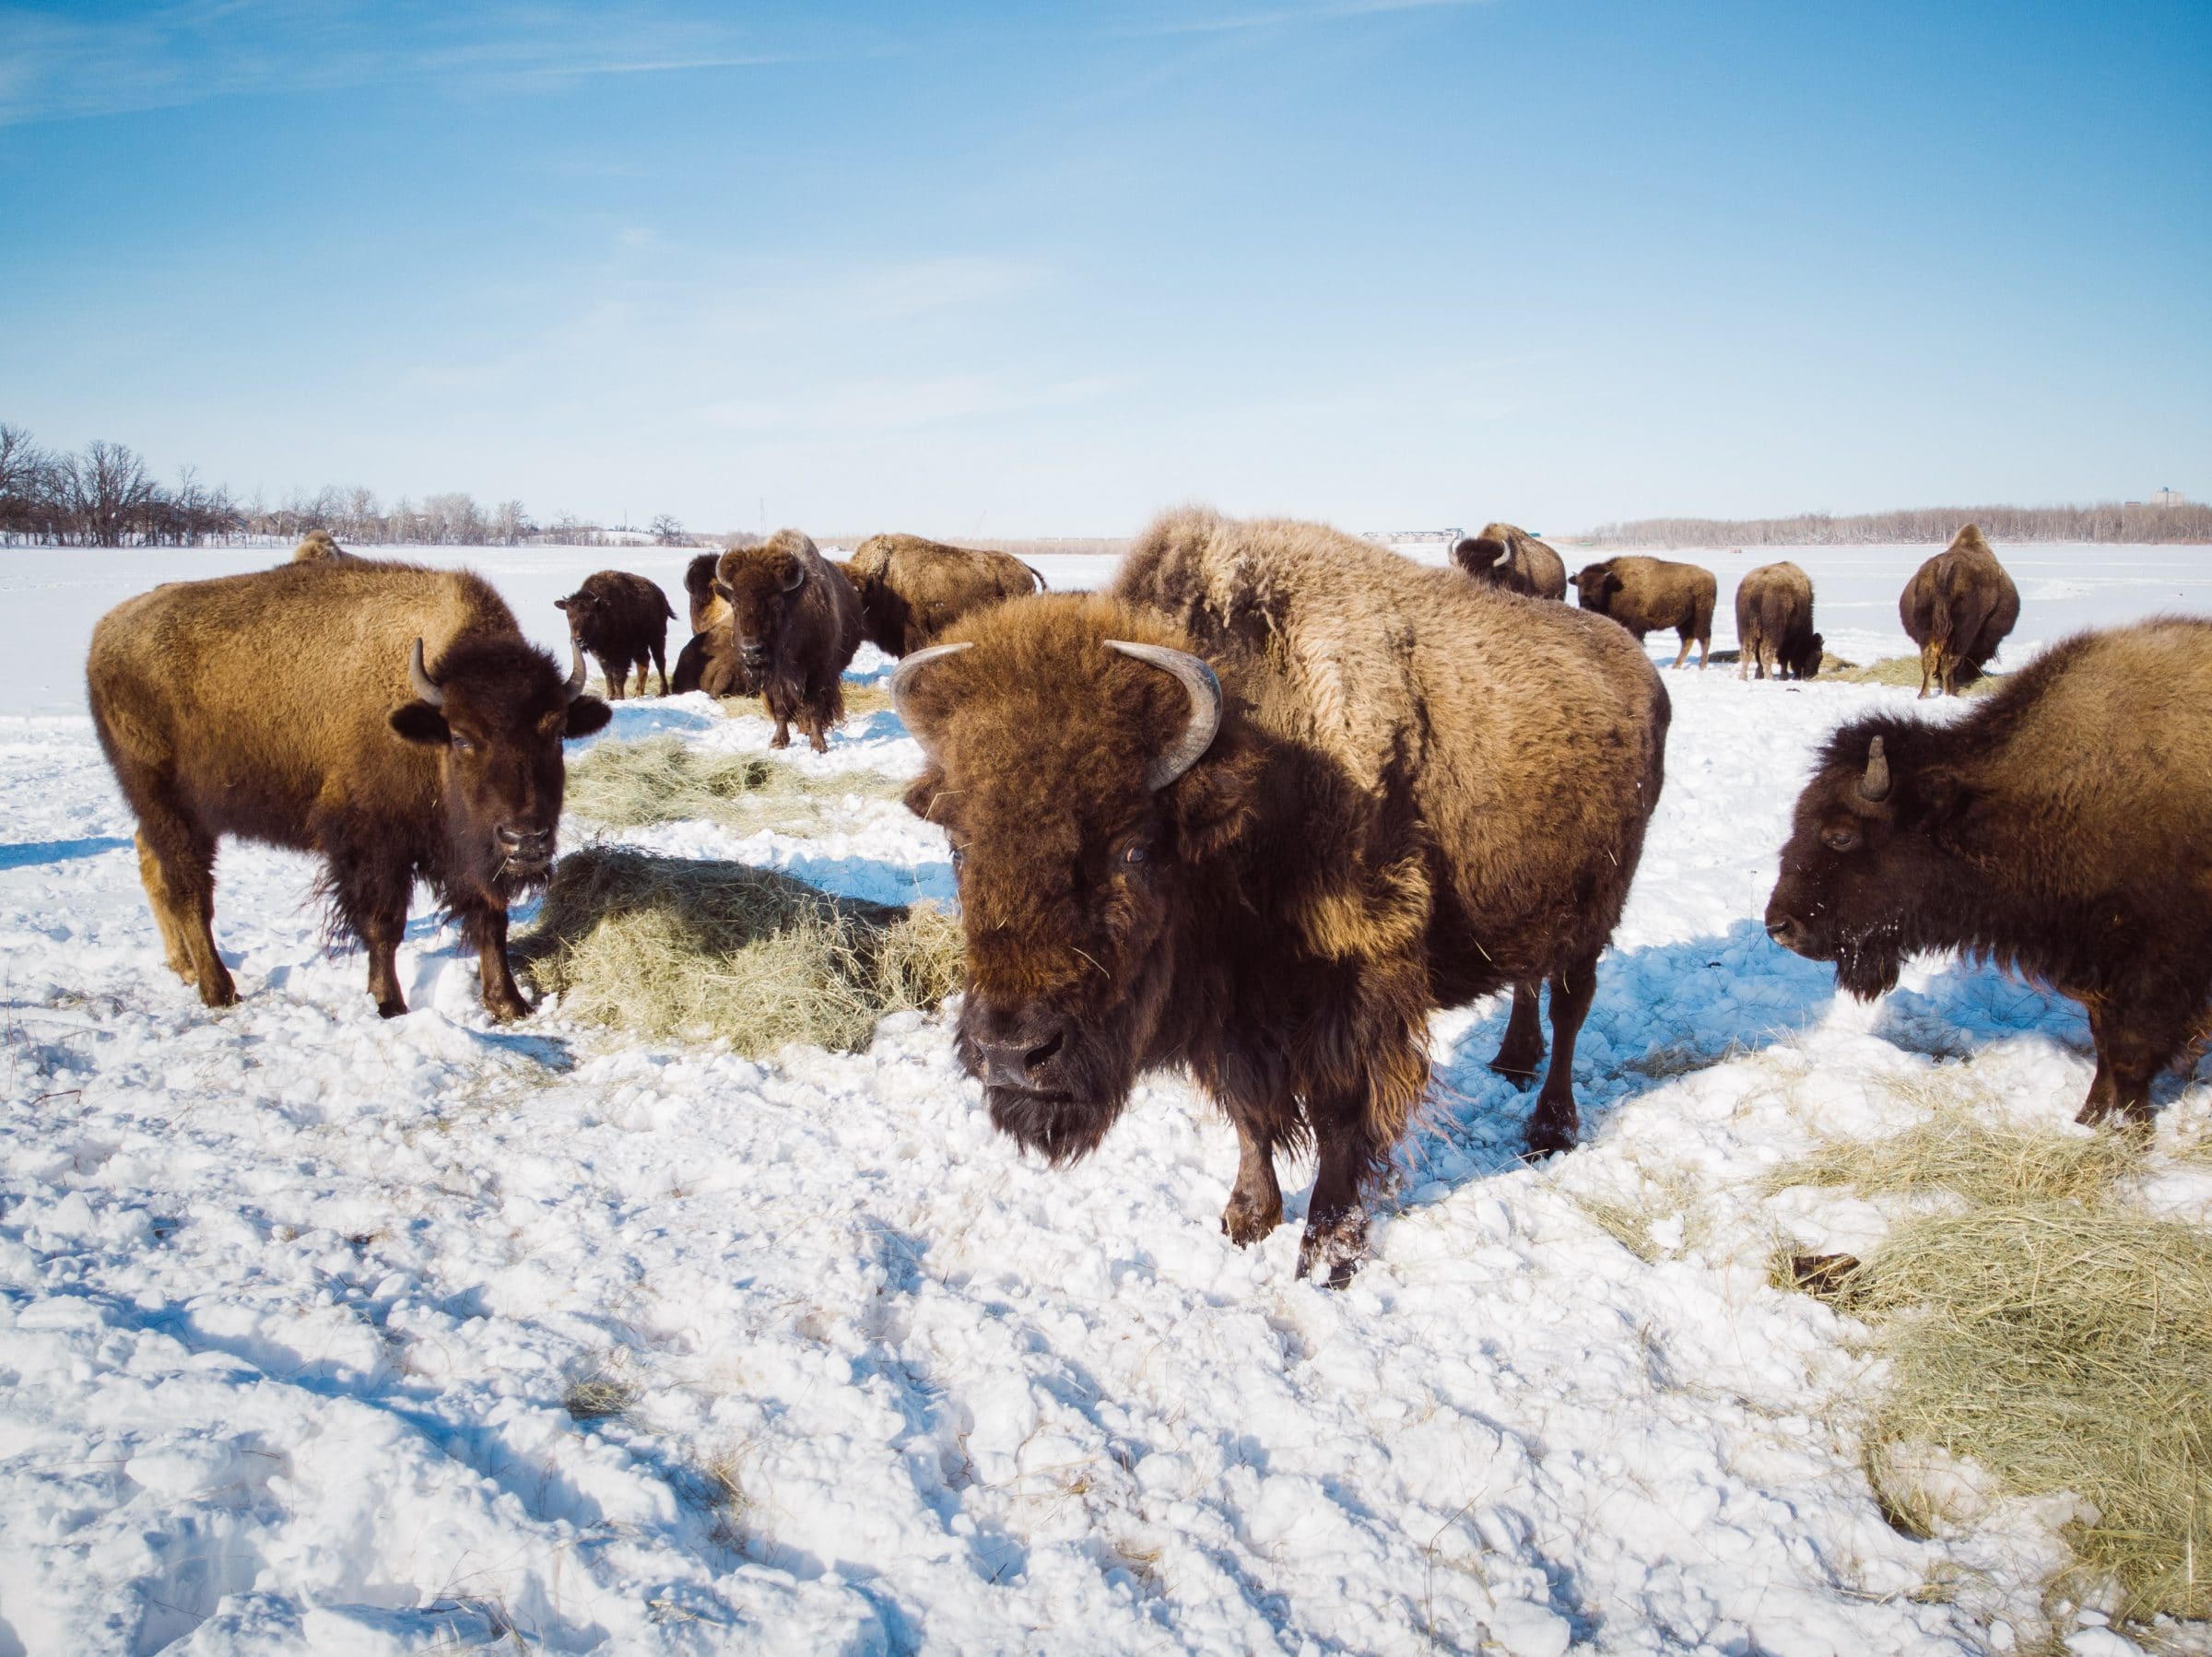 A group of bison stand together in the snow.